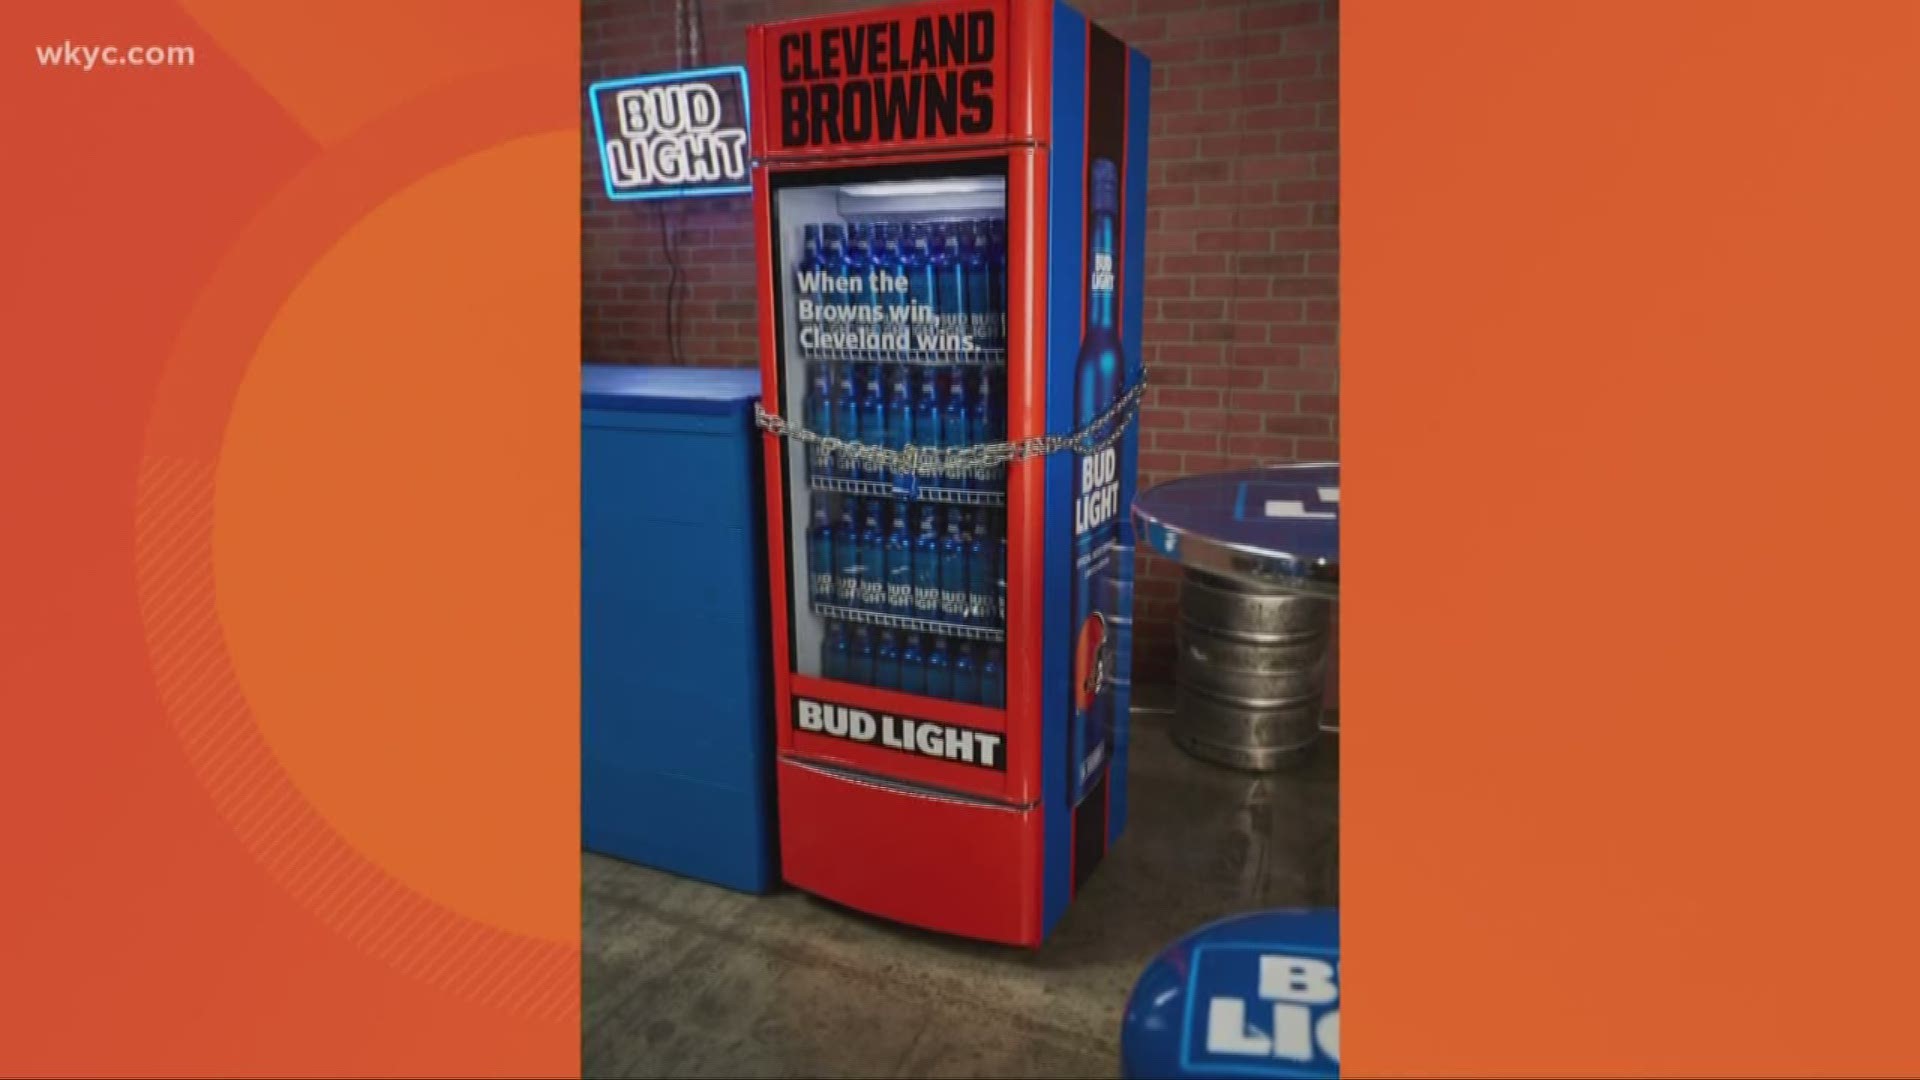 Aug. 14, 2018: Bud Light is installing 'Victory Fridges' throughout the Cleveland area, which will unlock via WiFi following the Browns' first regular-season win in 2018.